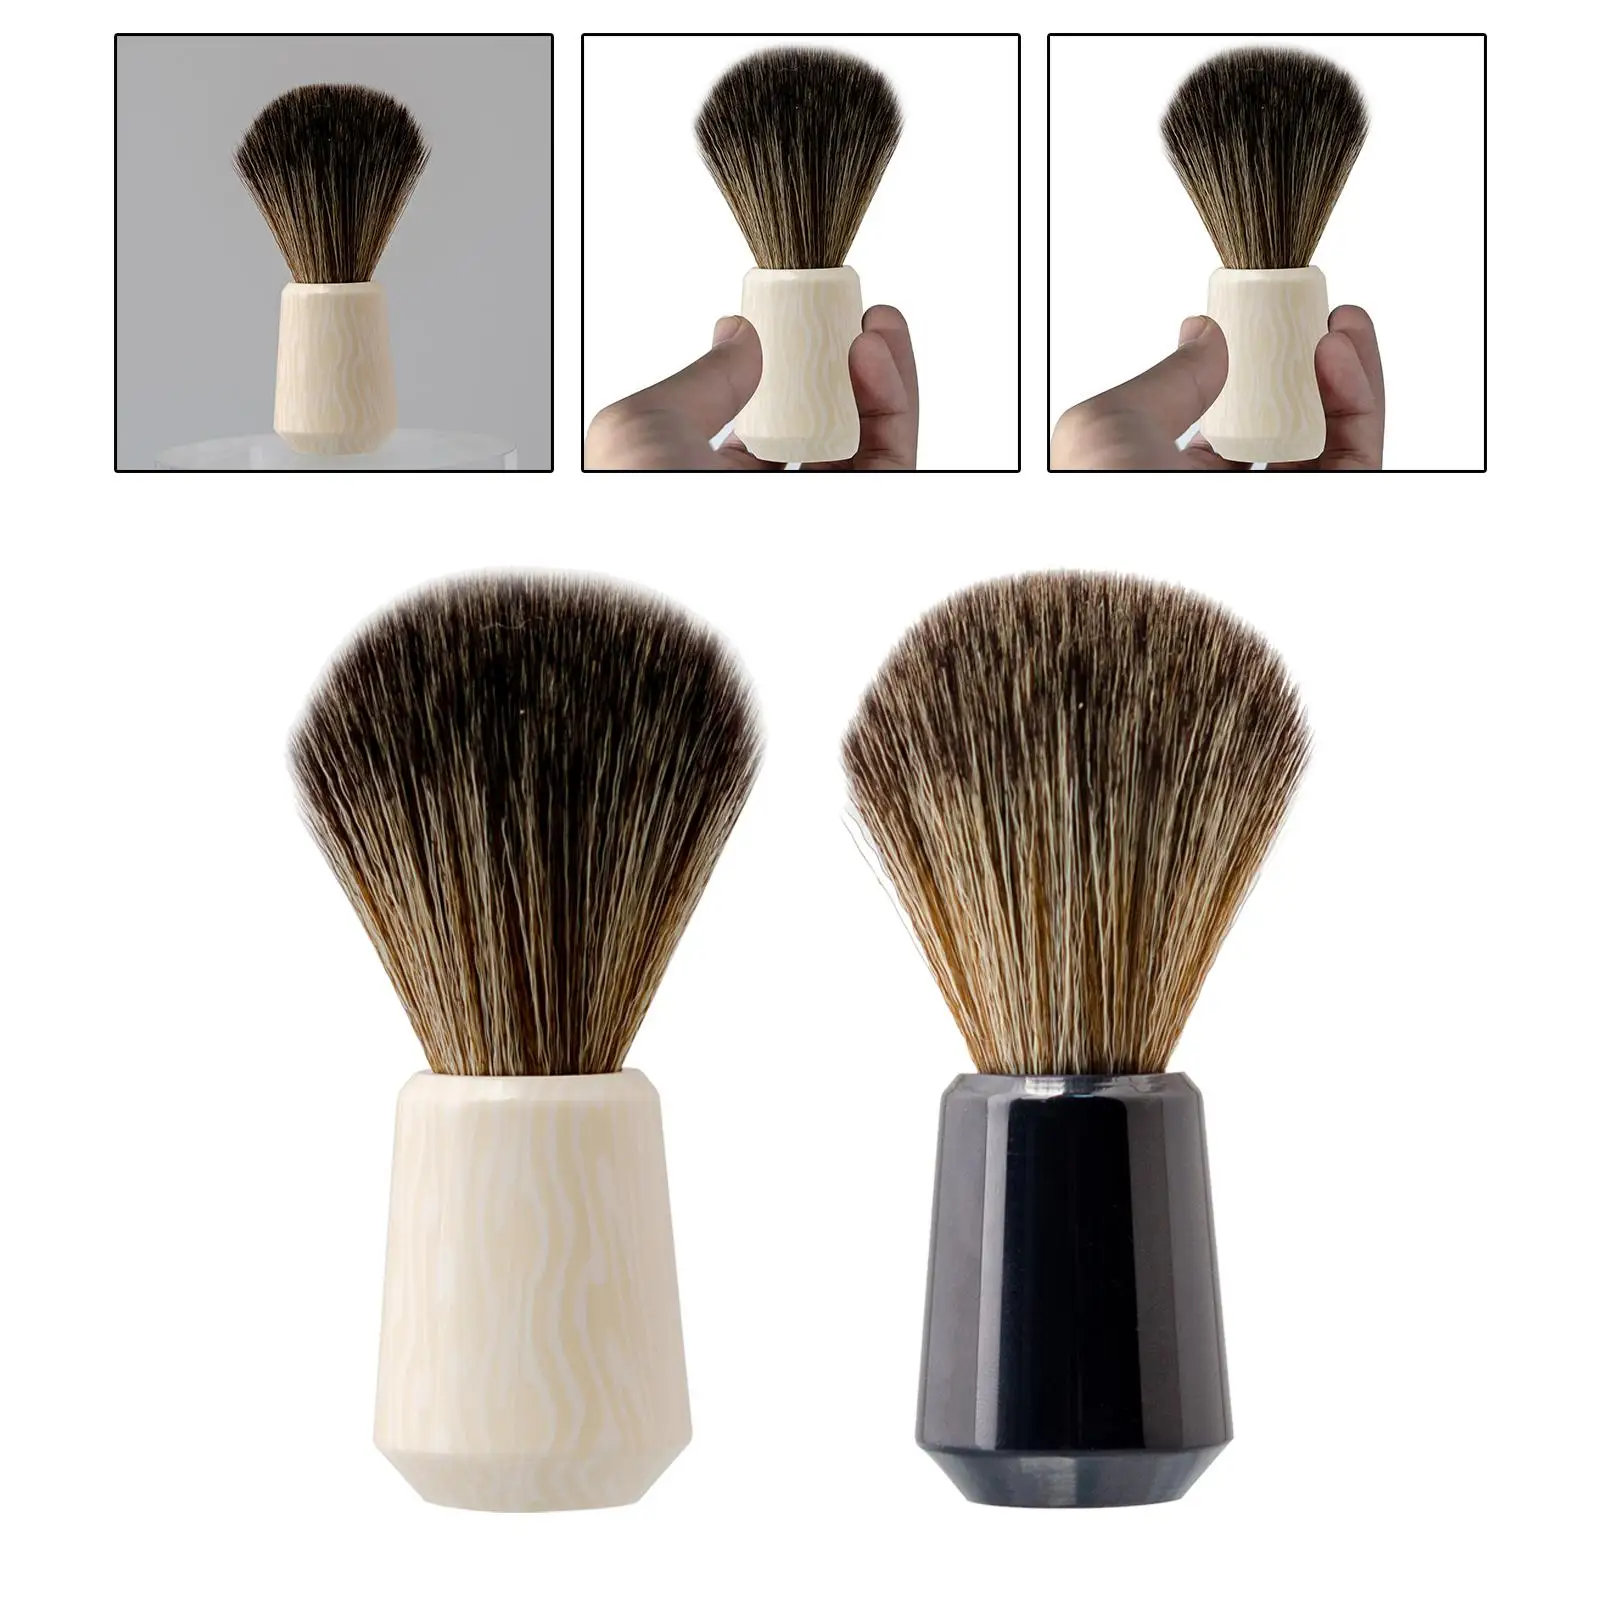 Men Shaving Brush Accessories Lightweight for Wet Shave Facial Beard Cleaning Resin Handle for Barbershop Hair Salon Home Travel